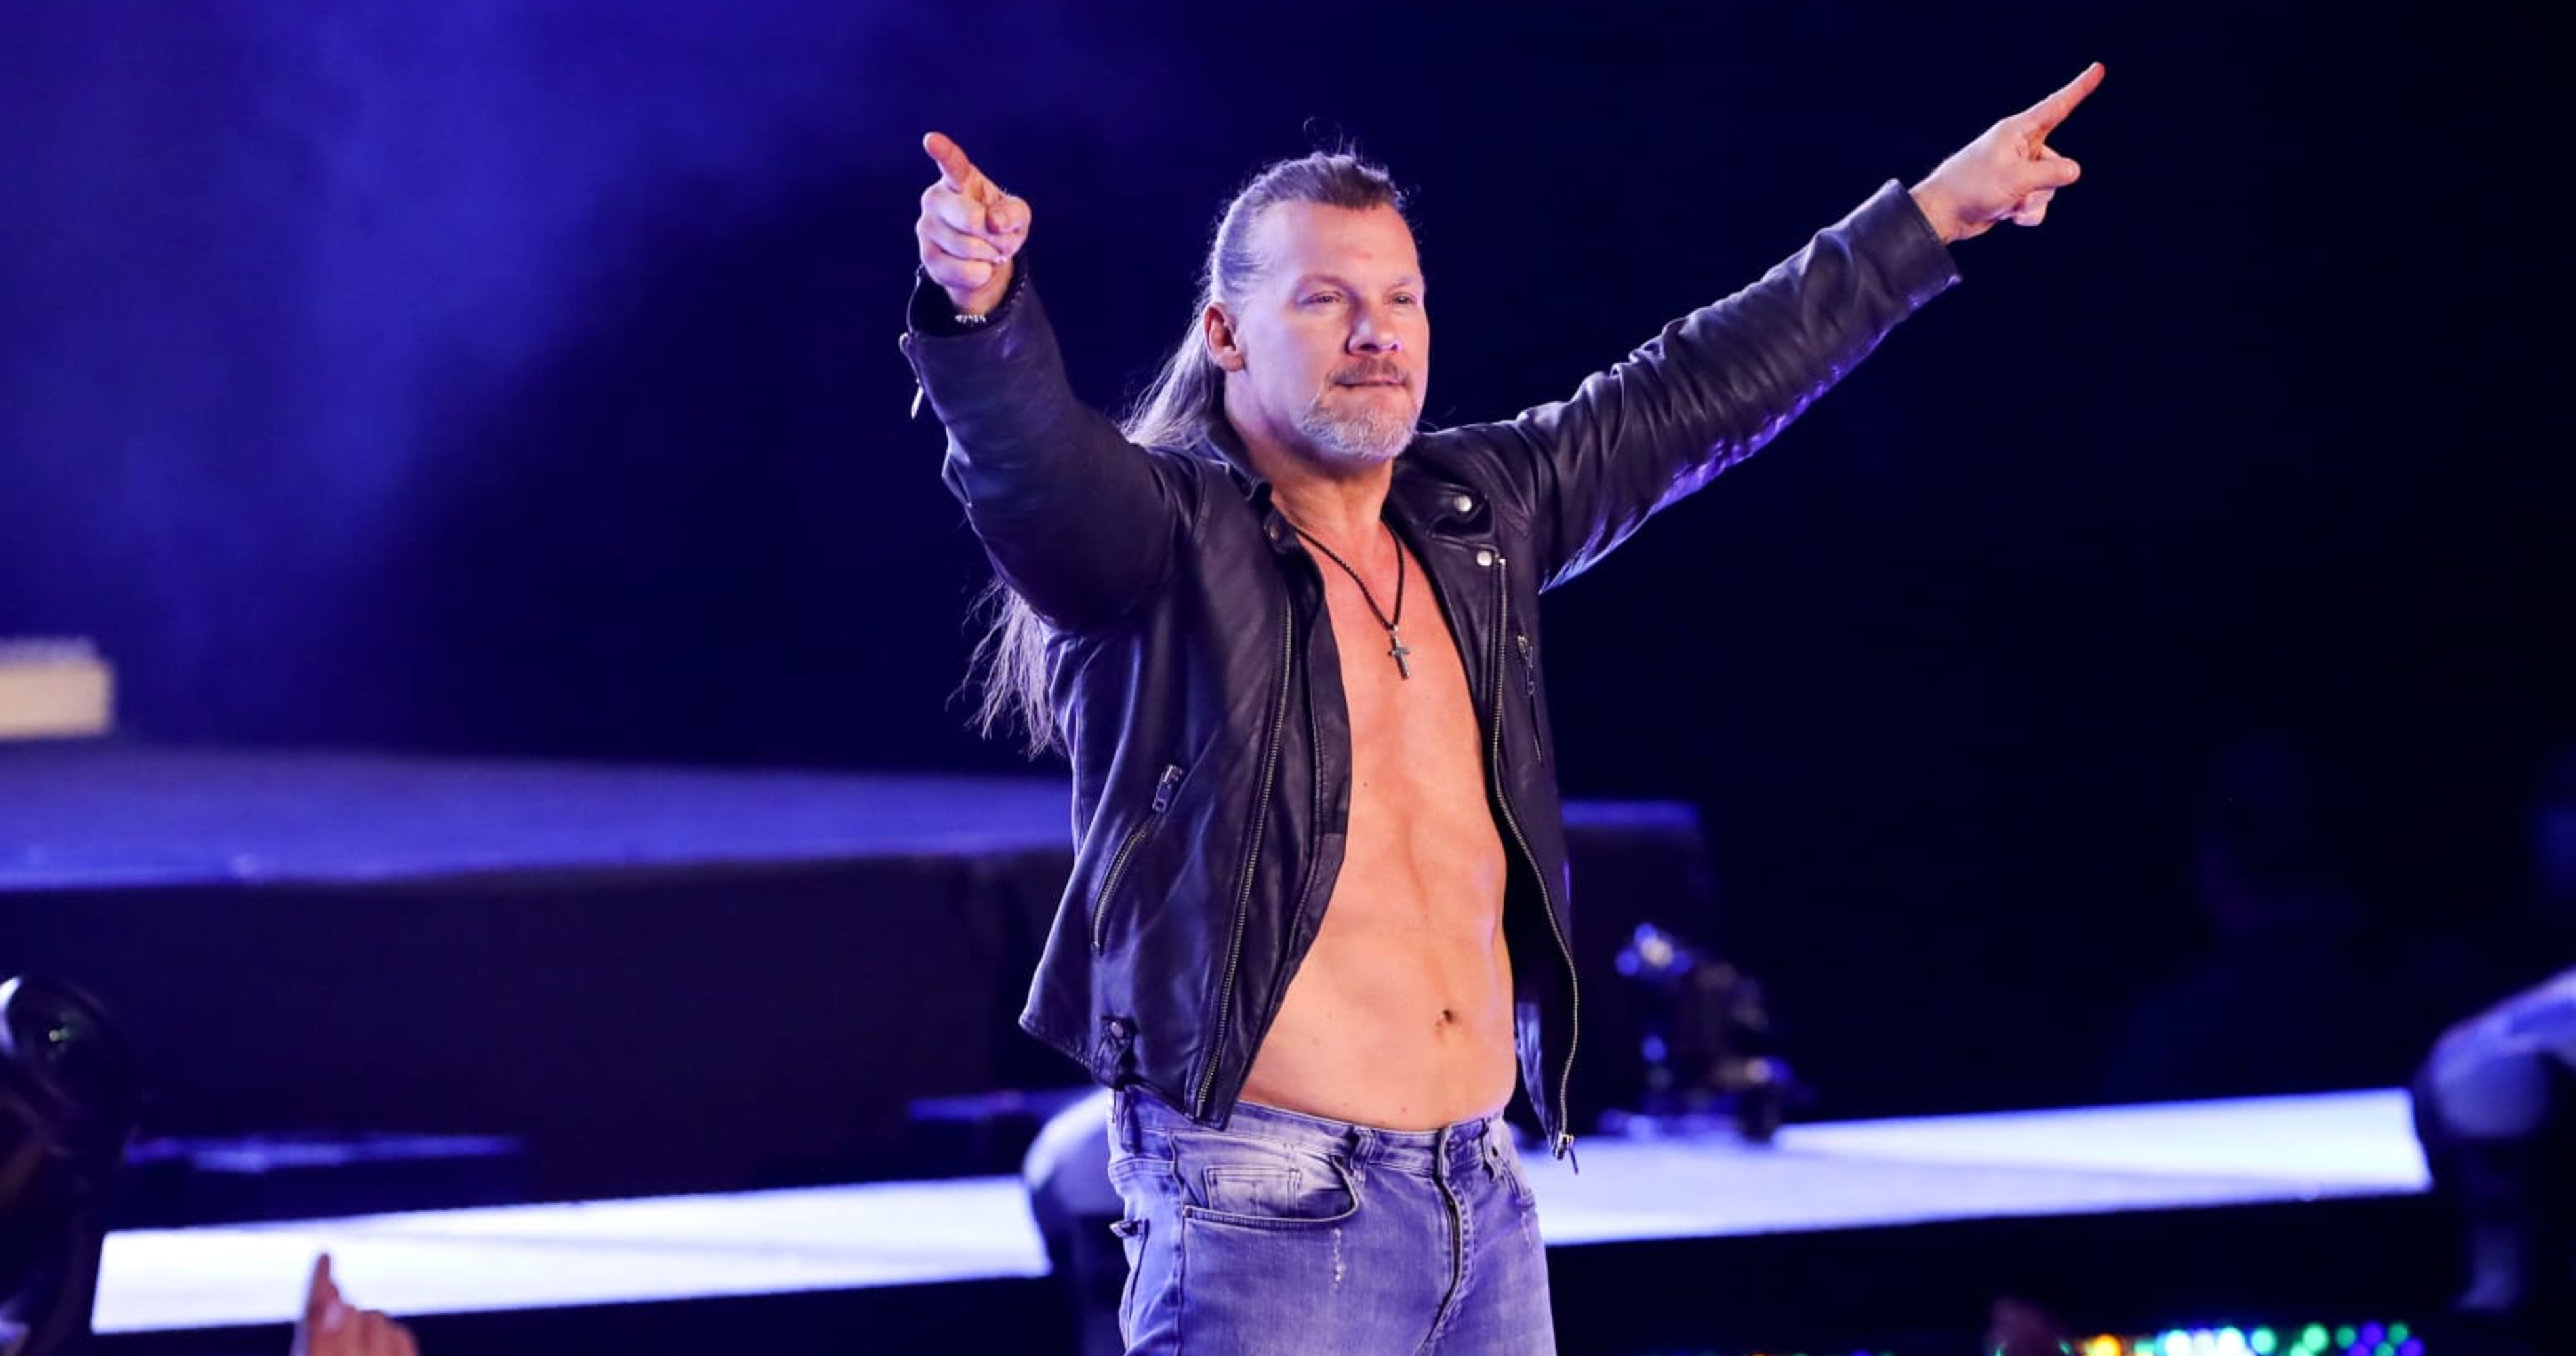 Chris Jericho, AEW Agree to 3-Year Contract Extension Through December 2025